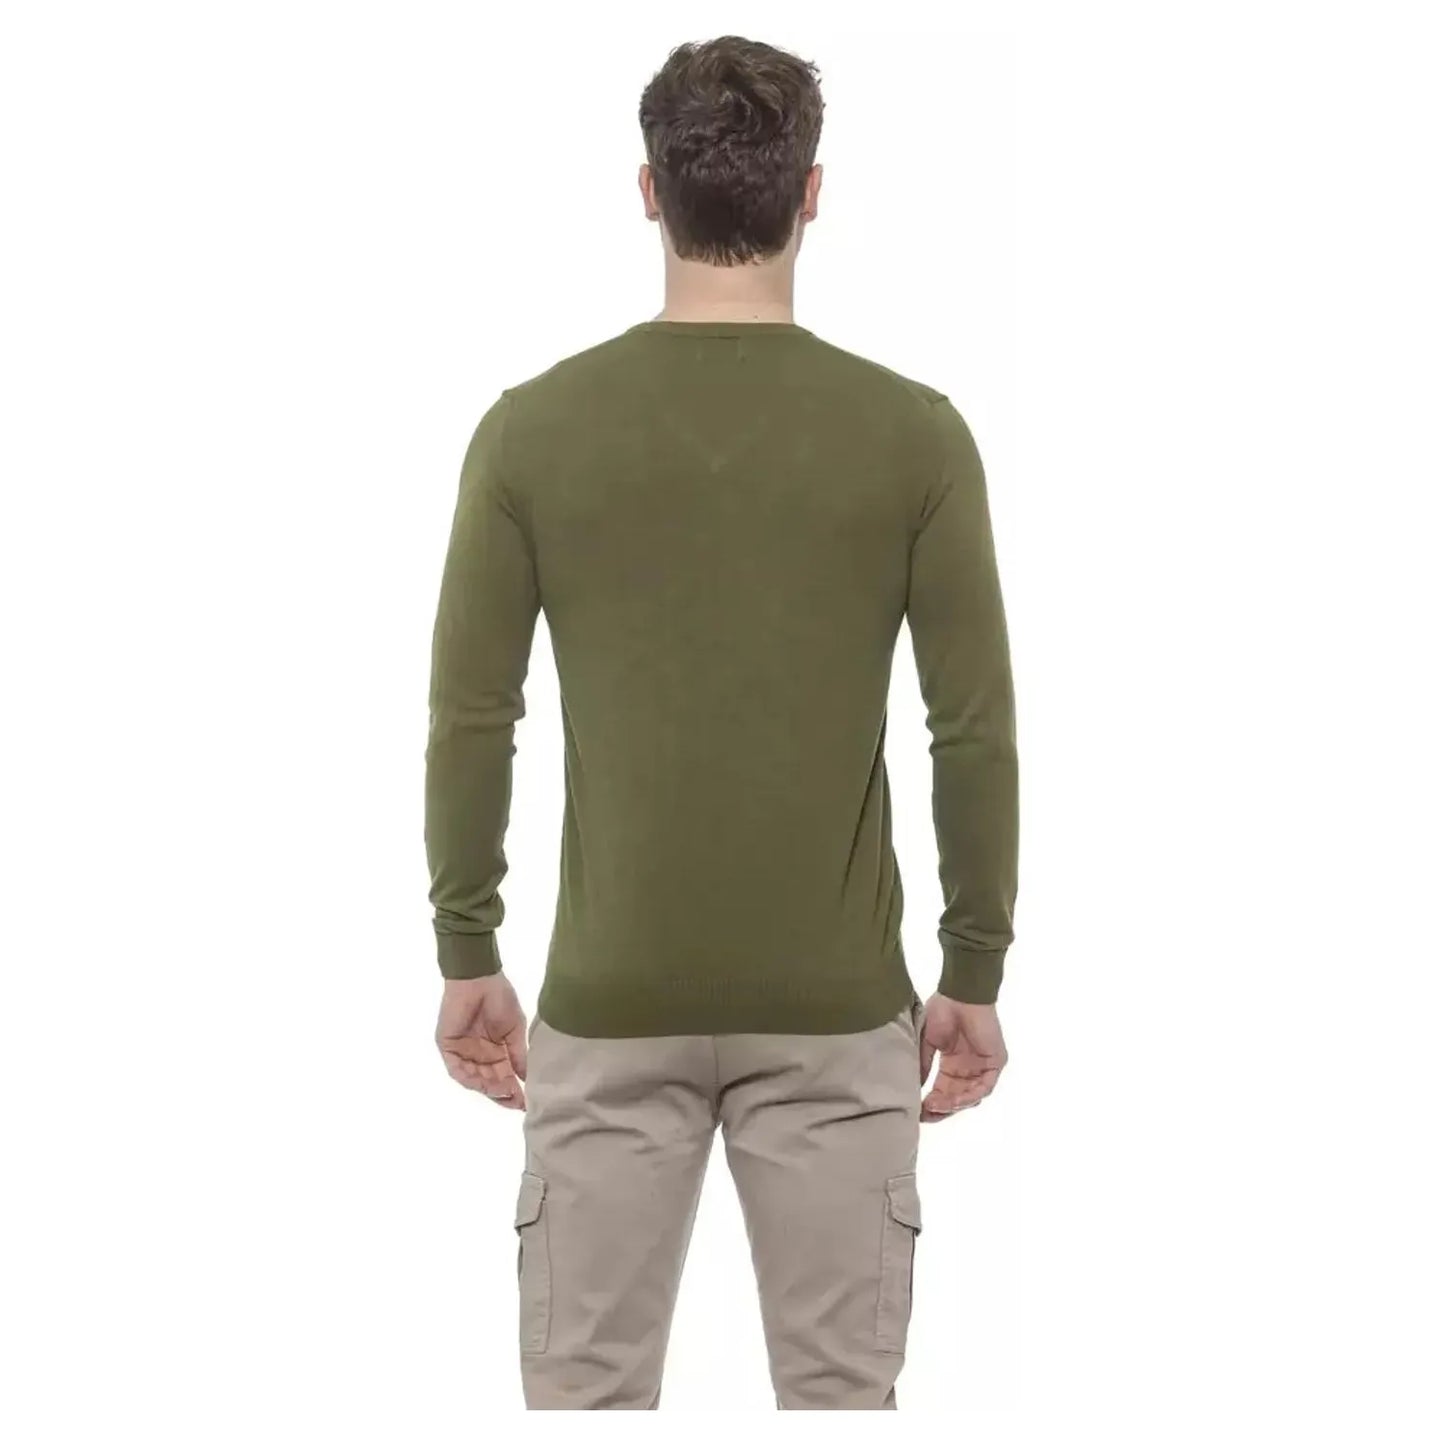 Conte of Florence Elegant V-Neck Green Cotton Sweater olivegreen-sweater stock_product_image_20336_581057708-16-c7fca7e4-d00.webp